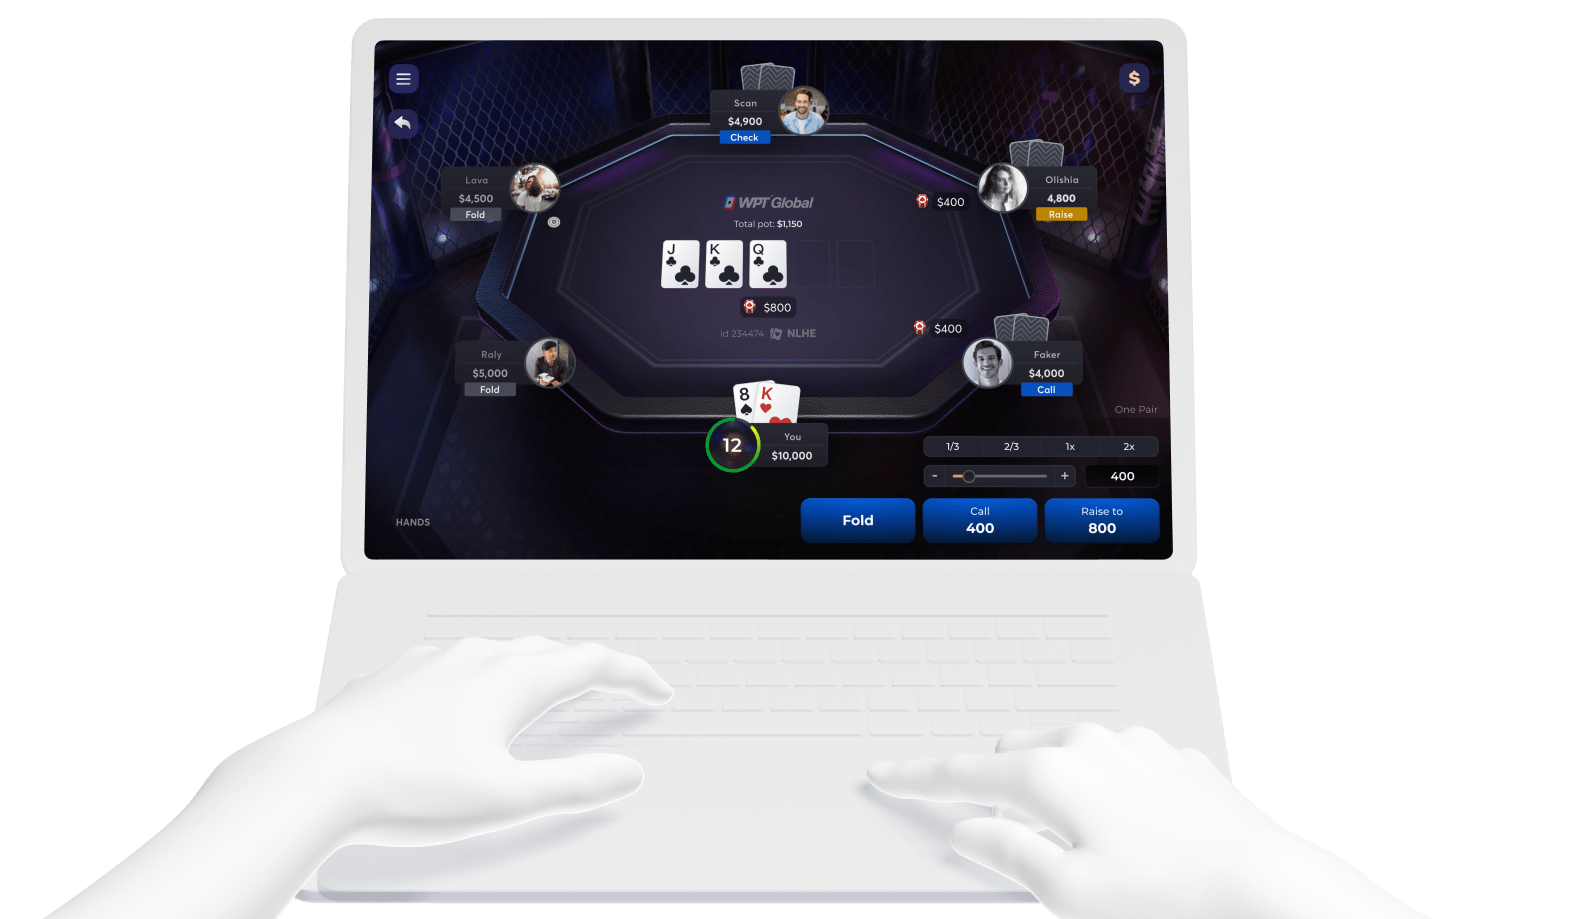 Download and Install WPT Free Poker: Global Application